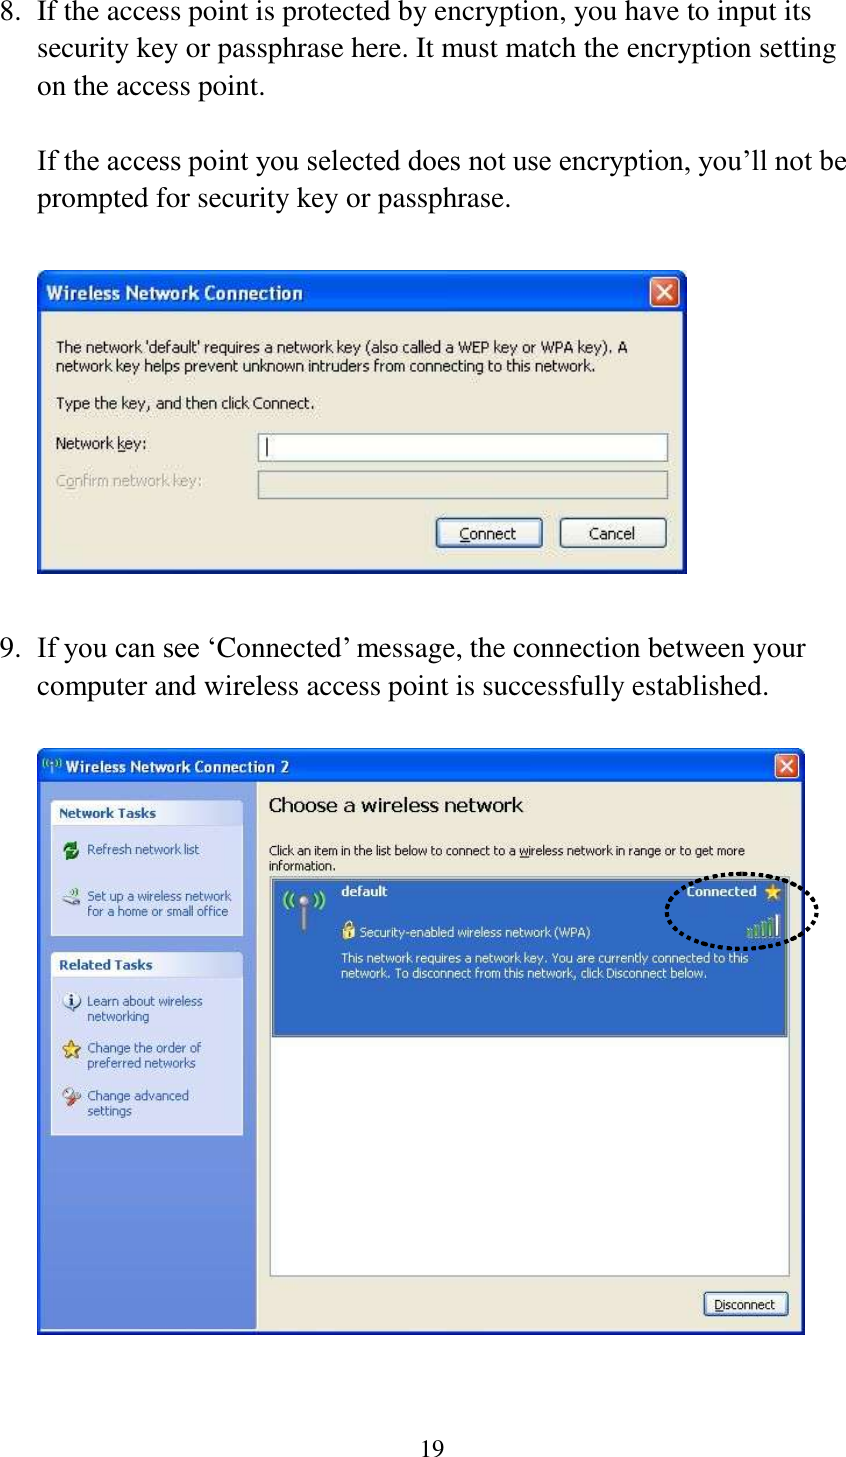 19  8. If the access point is protected by encryption, you have to input its security key or passphrase here. It must match the encryption setting on the access point.  If the access point you selected does not use encryption, you’ll not be prompted for security key or passphrase.    9. If you can see ‘Connected’ message, the connection between your computer and wireless access point is successfully established.     